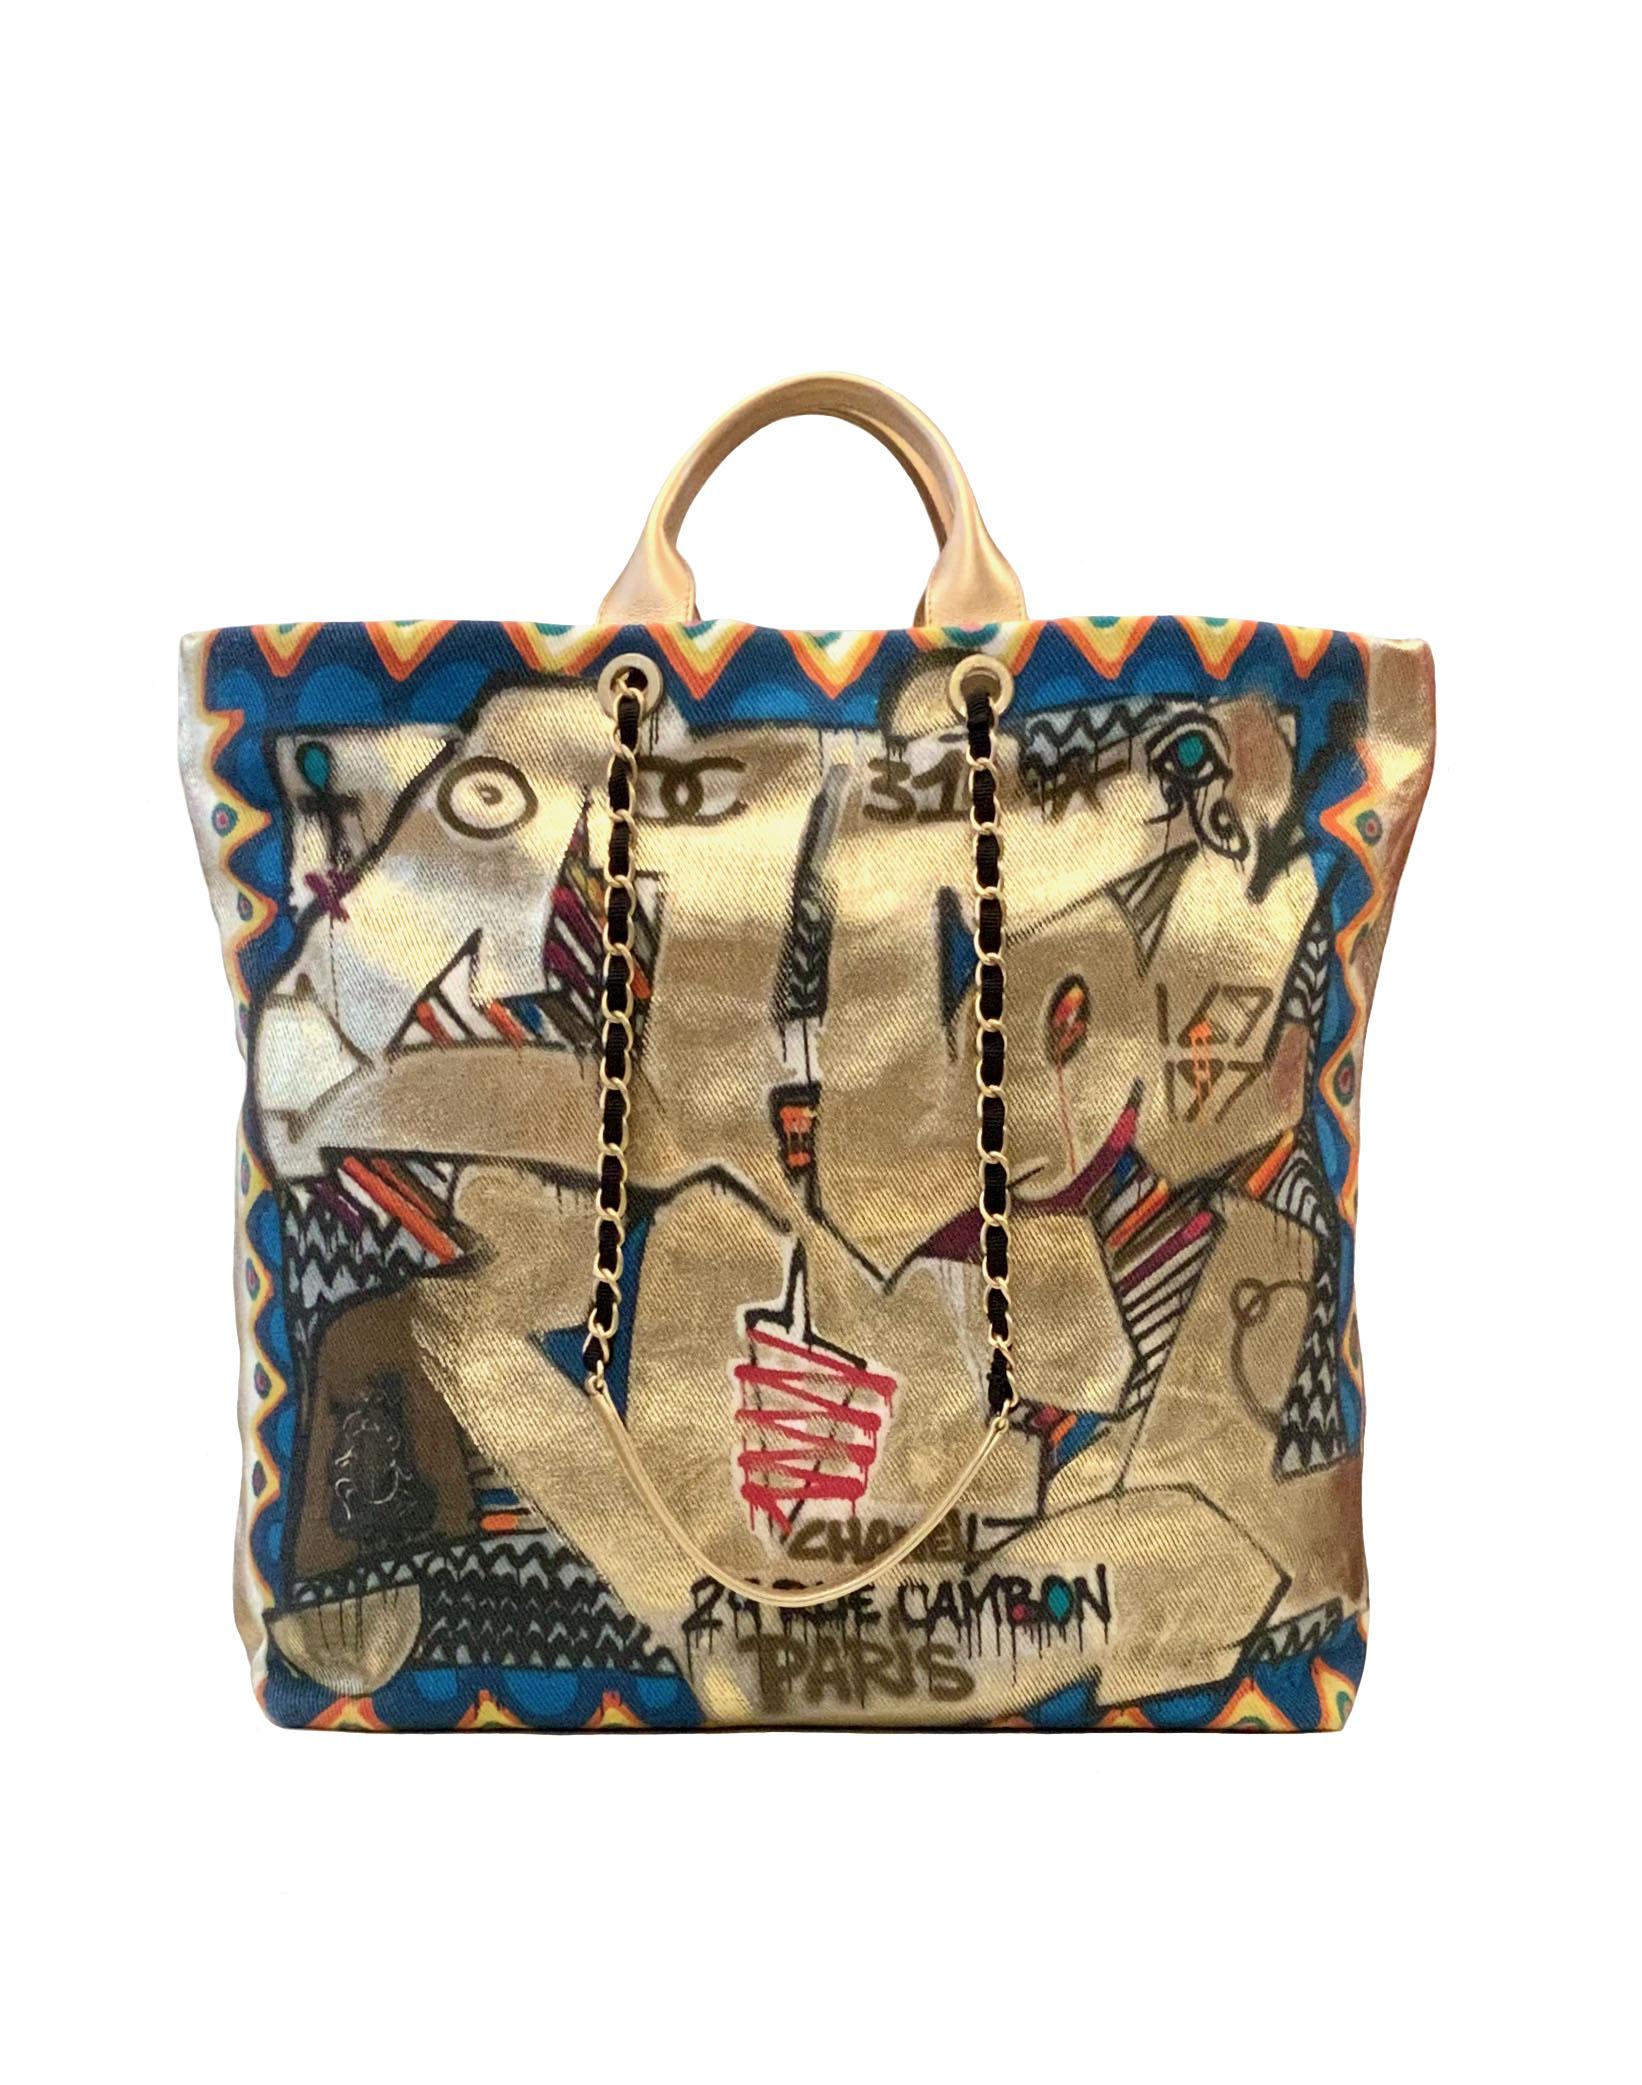 Chanel Métiers D’Art Collection for 2019, also known as the Pre-Fall 2019 Collection, is about the culture of New York. The design of the handbags will reflect the mindset of the big city NY with street styles, graffiti paints. 

This pre-owned